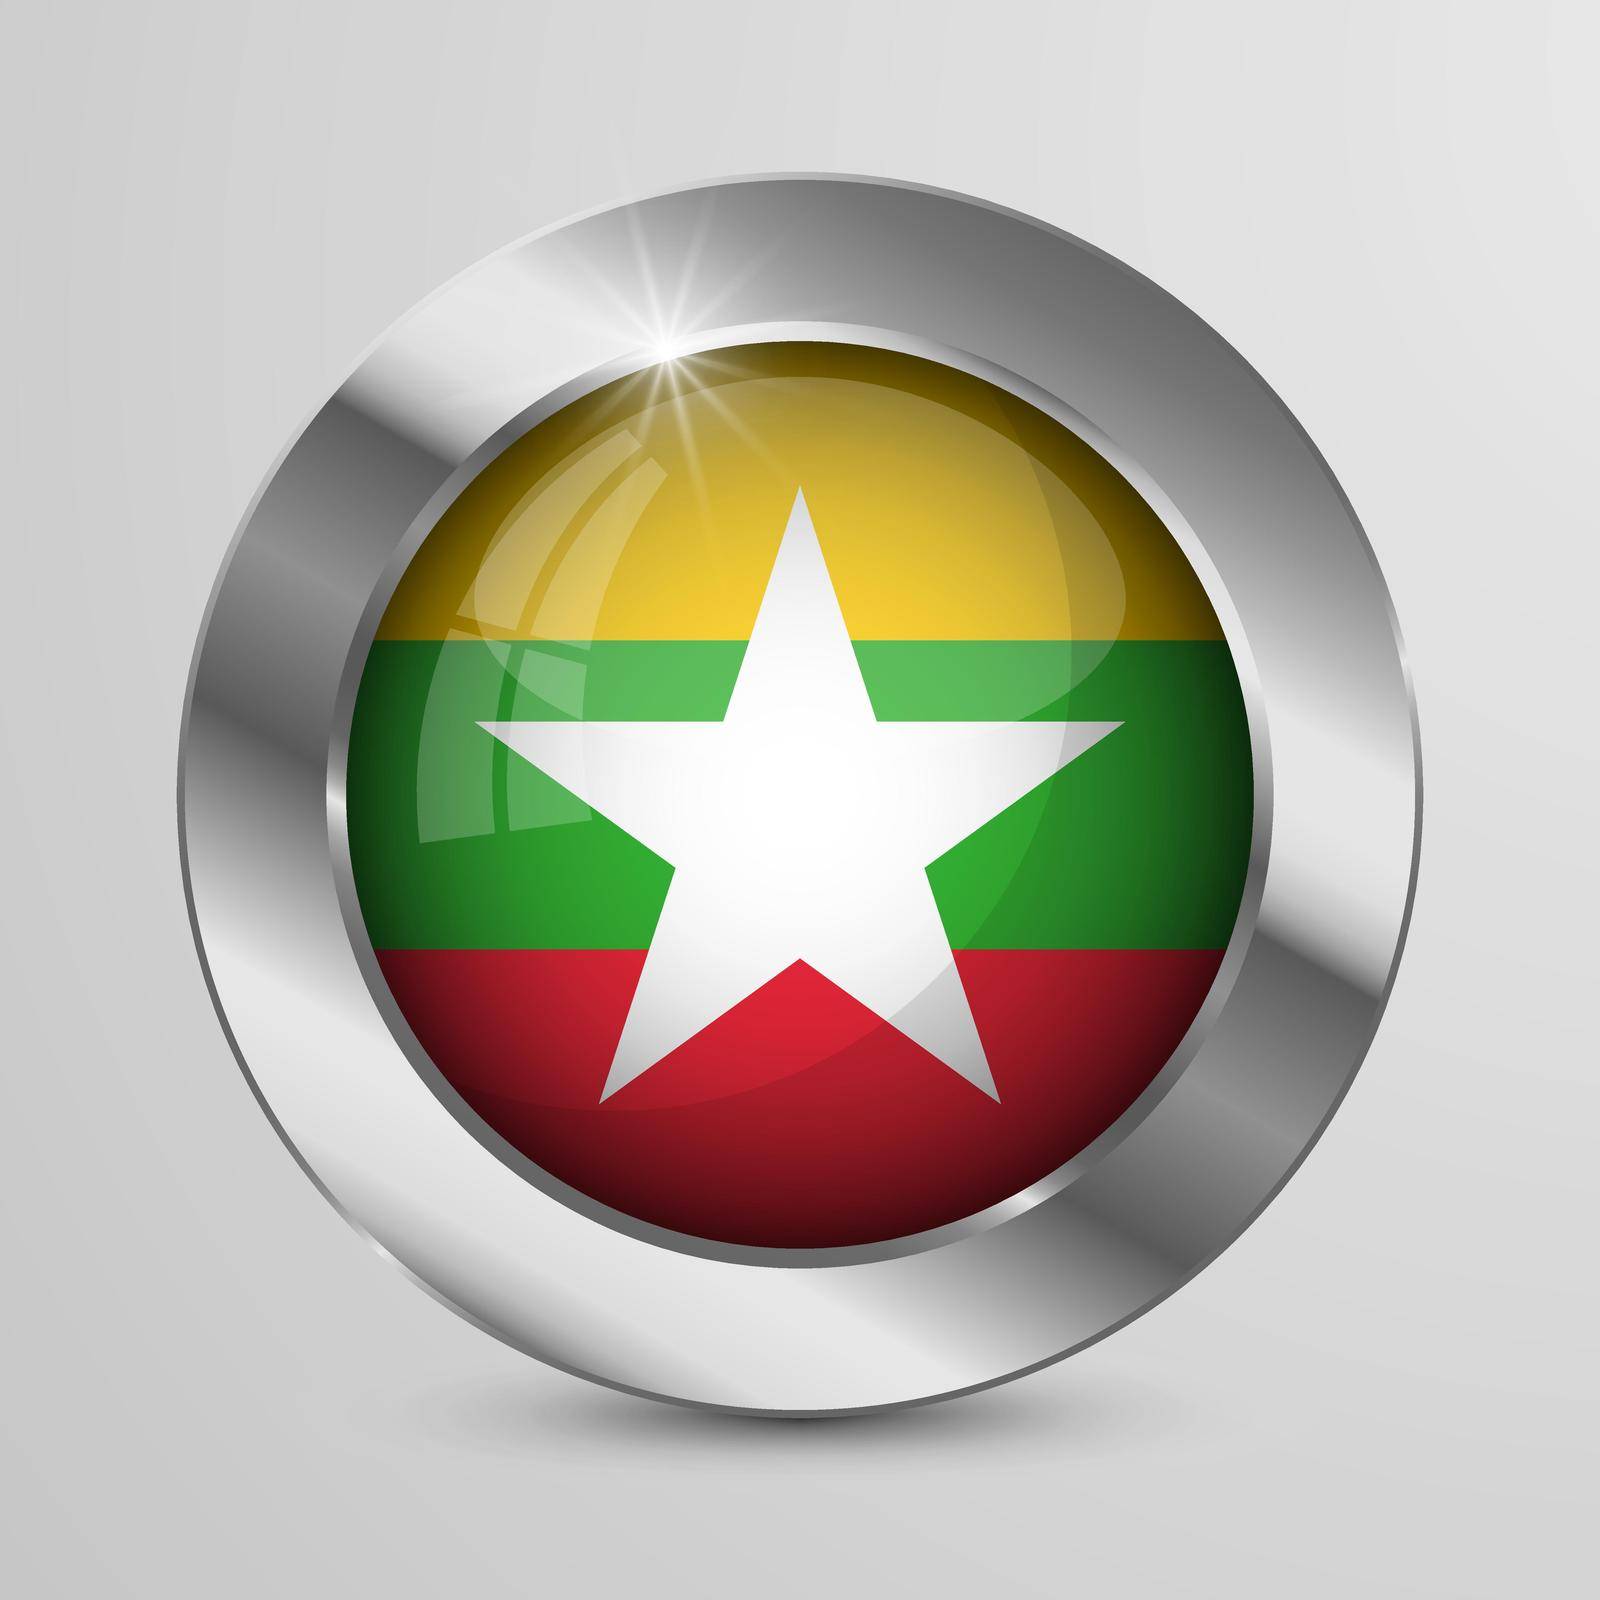 EPS10 Vector Patriotic Button with Myanmar flag colors. An element of impact for the use you want to make of it.